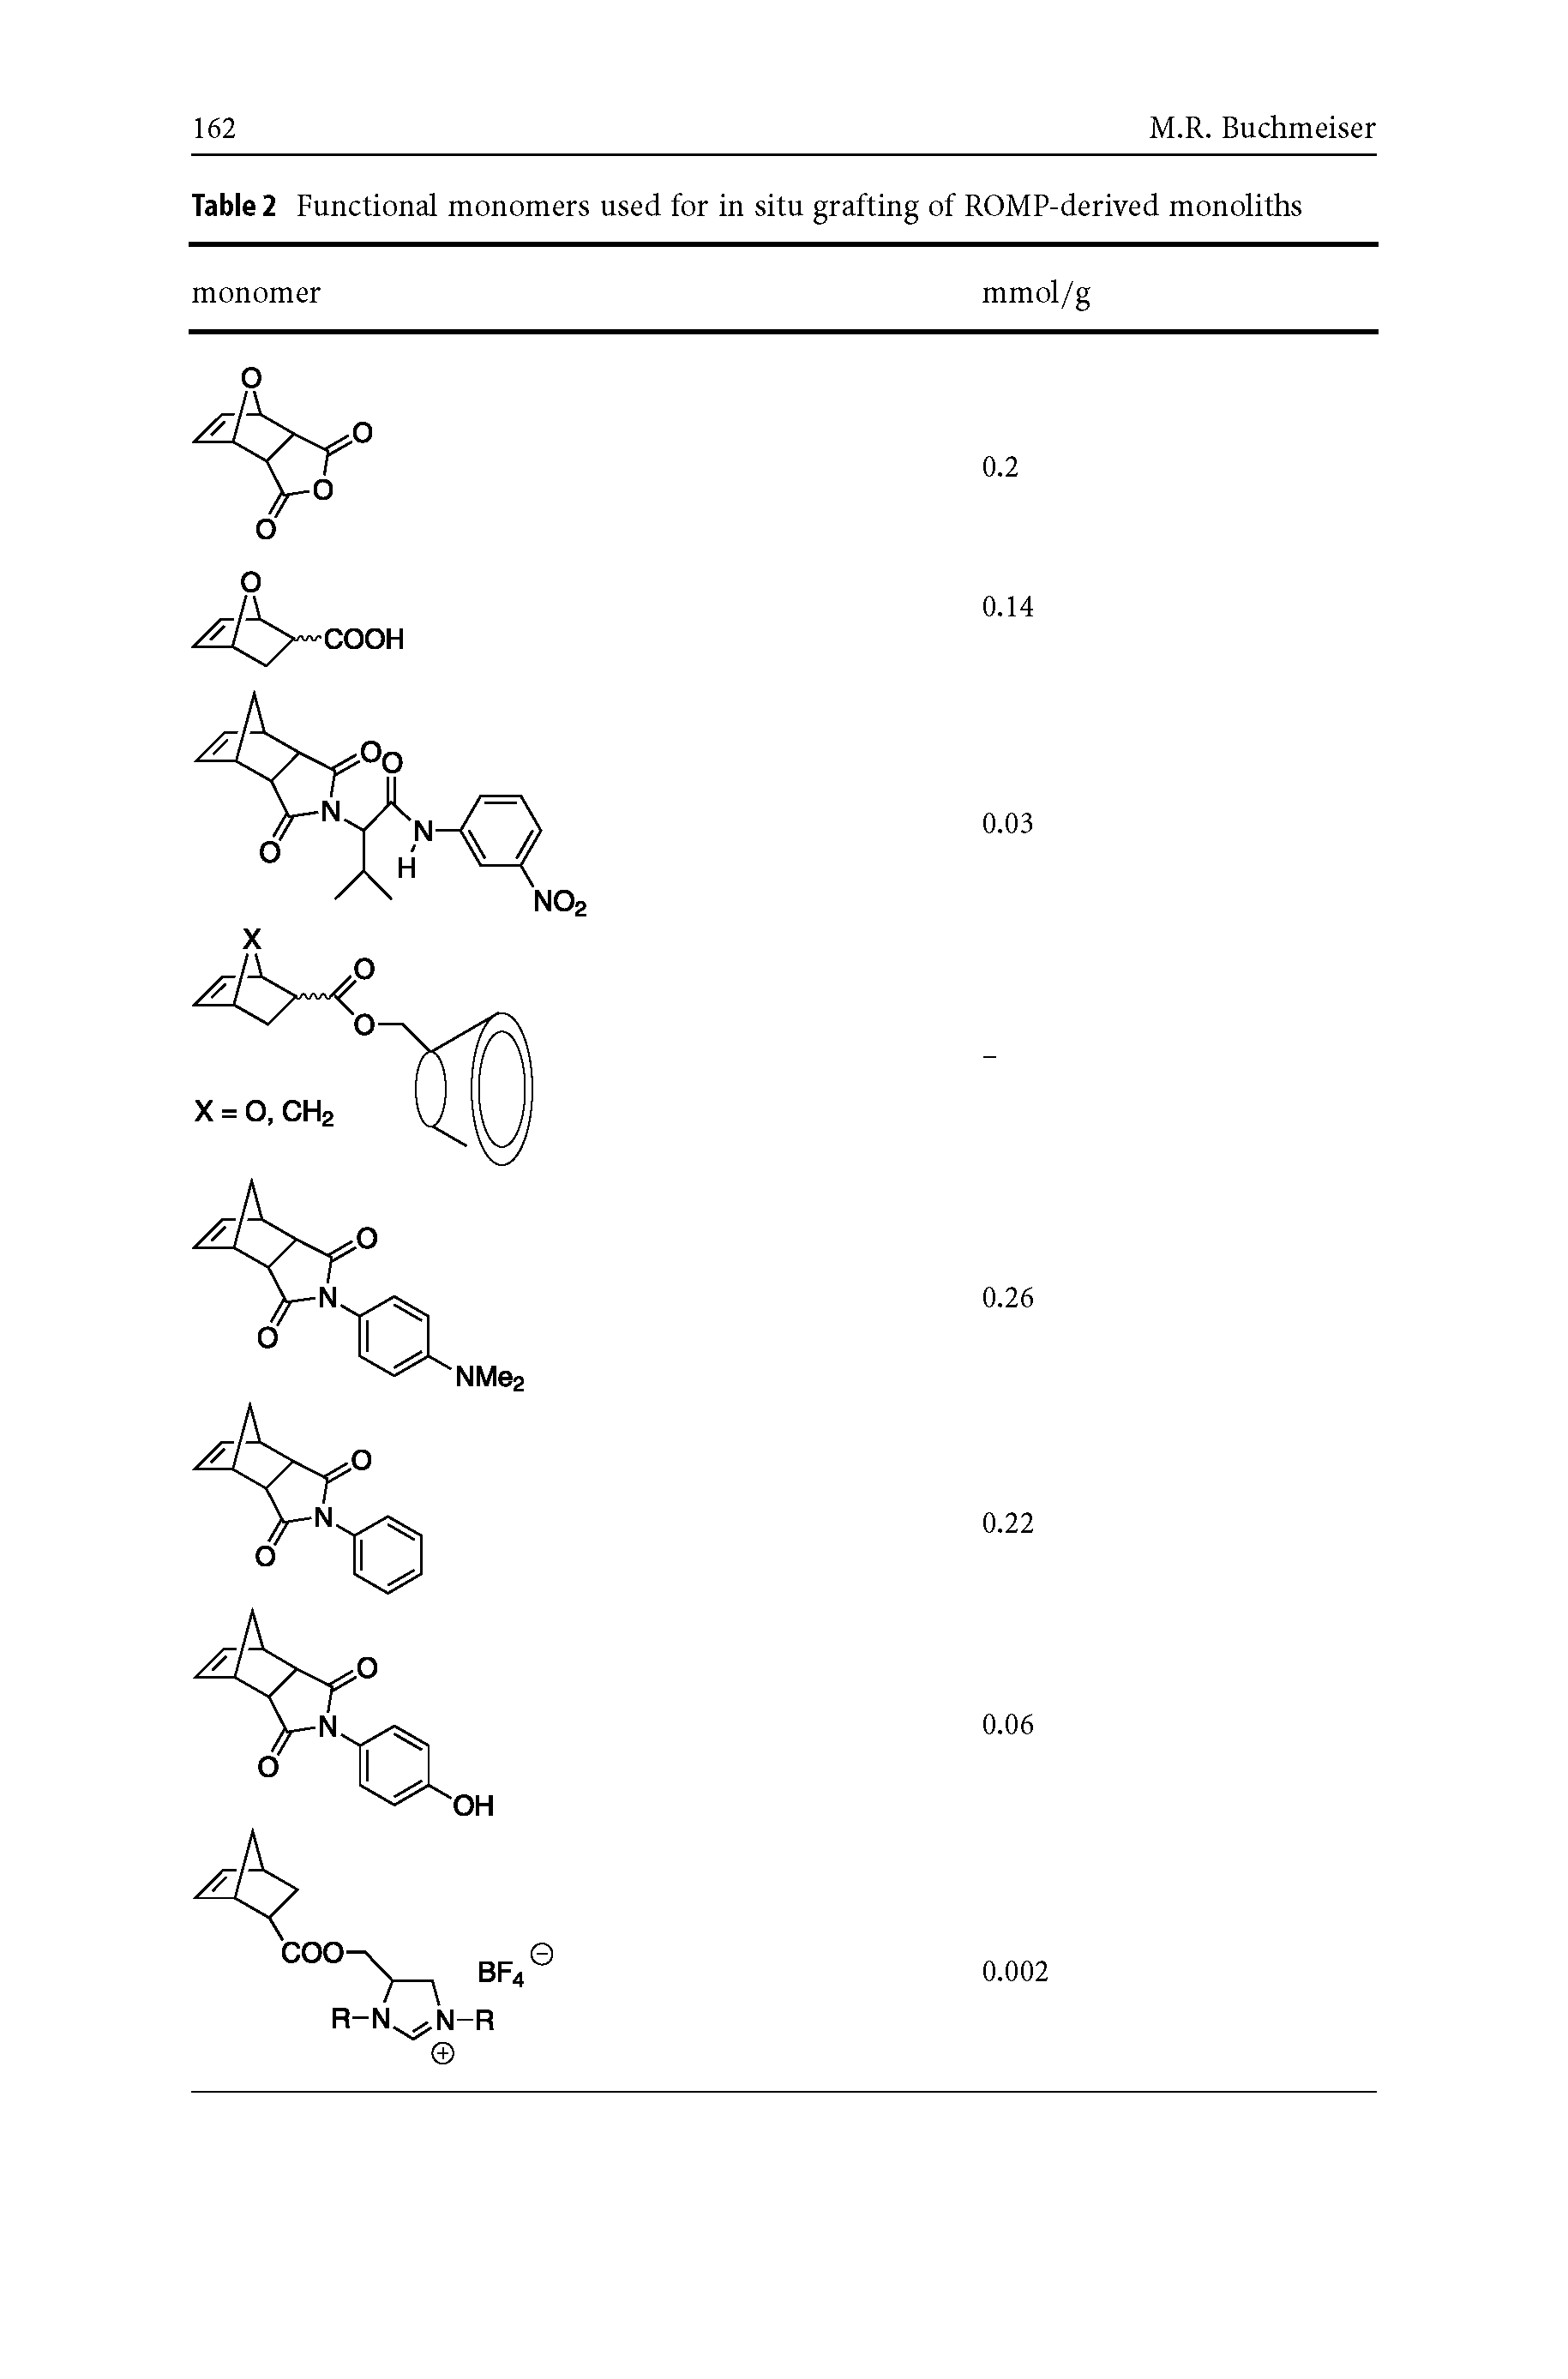 Table 2 Functional monomers used for in situ grafting of ROMP-derived monoliths...